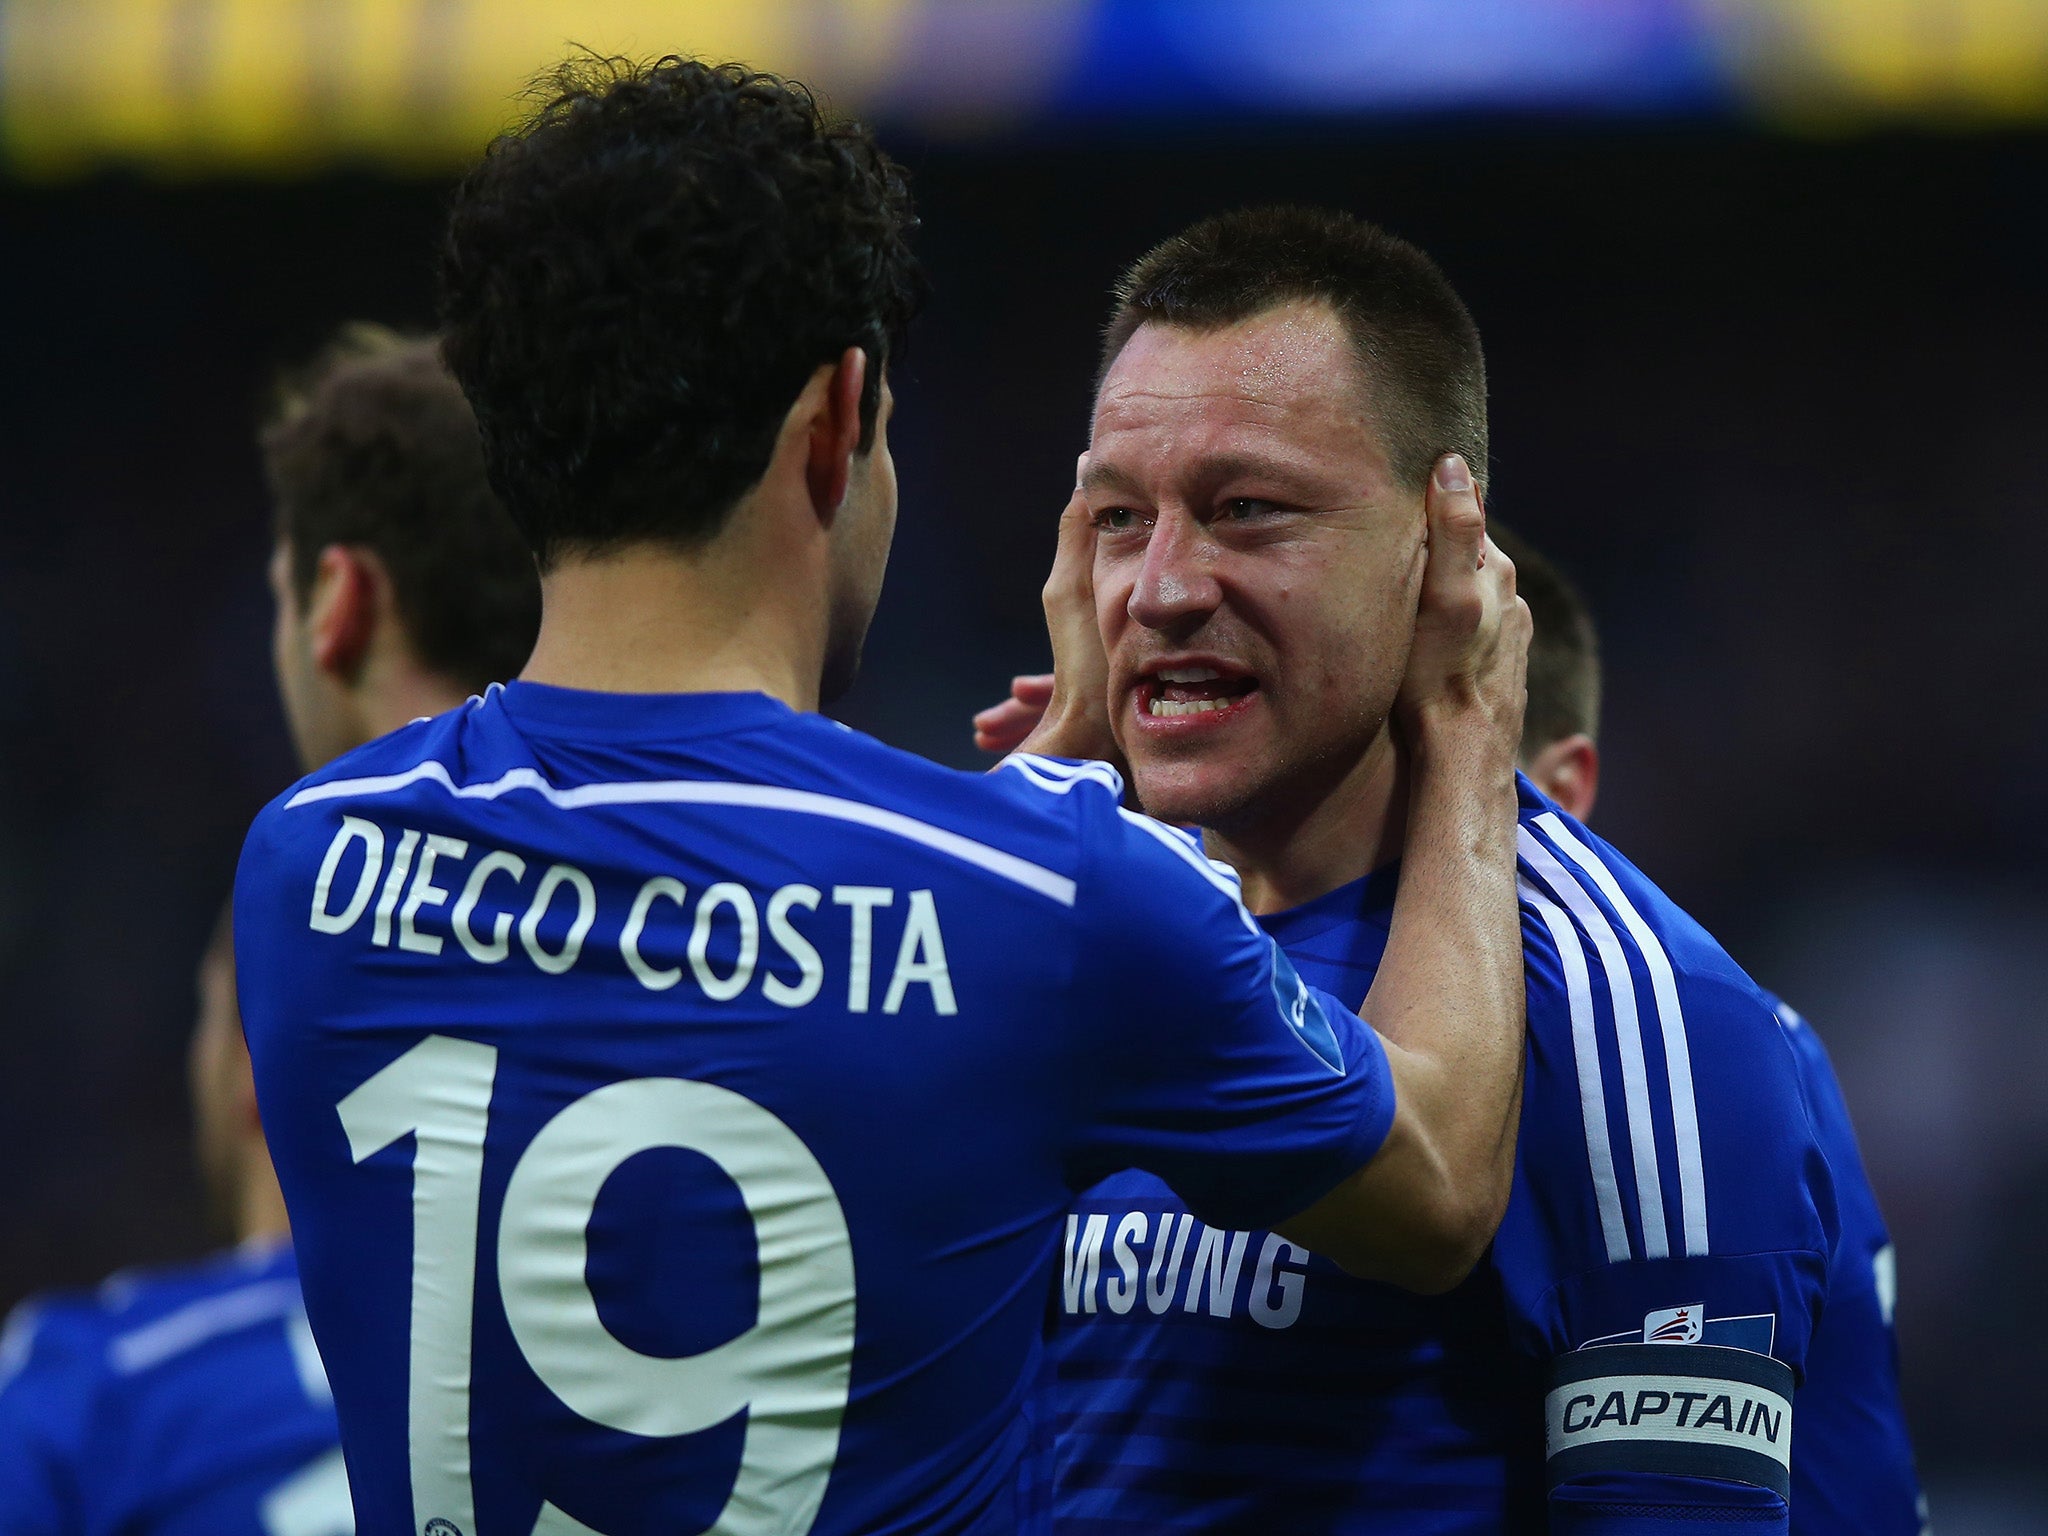 Claims of a bust-up between John Terry and Diego Costa have been dismissed by Chelsea